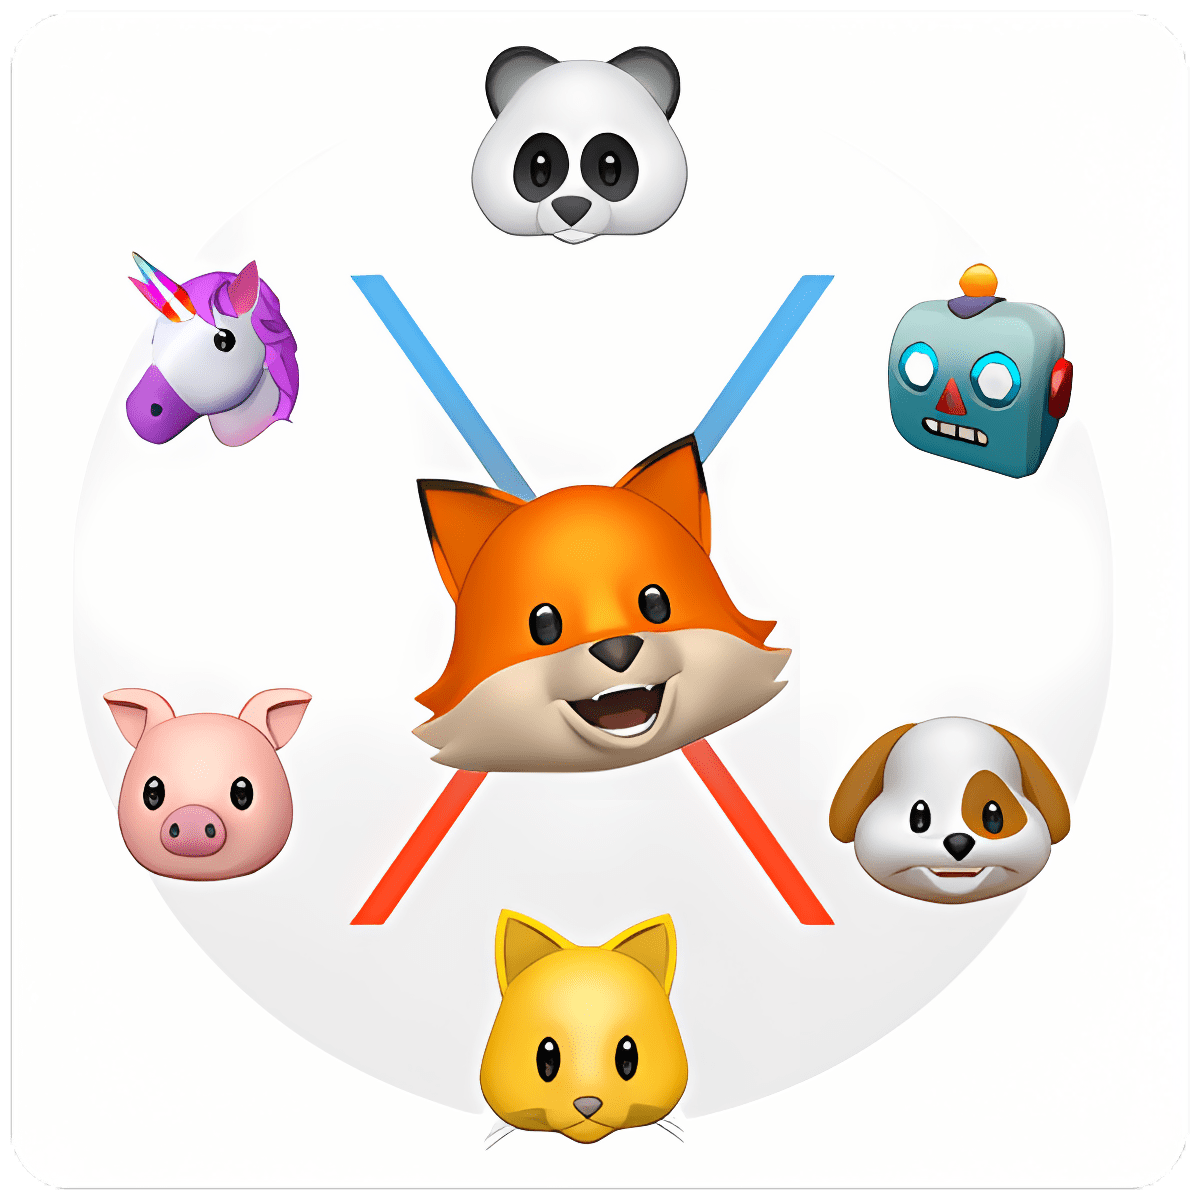 Animoji for Android - Download - 300 x 300 png 20kB